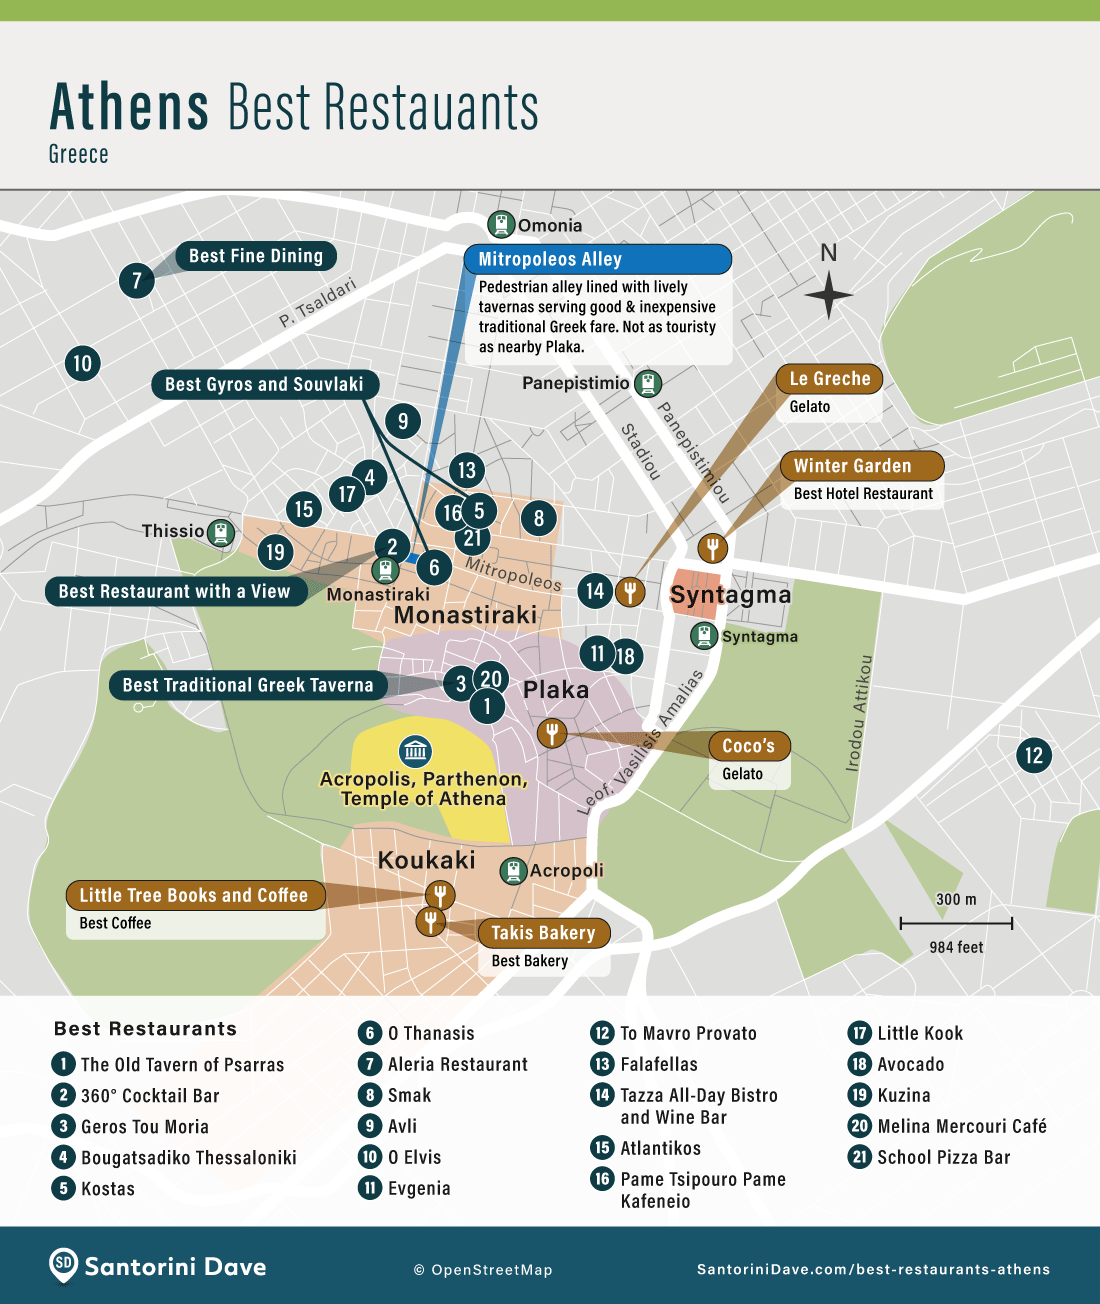 Map showing the locations of the 21 best restaurants in Athens, Greece.